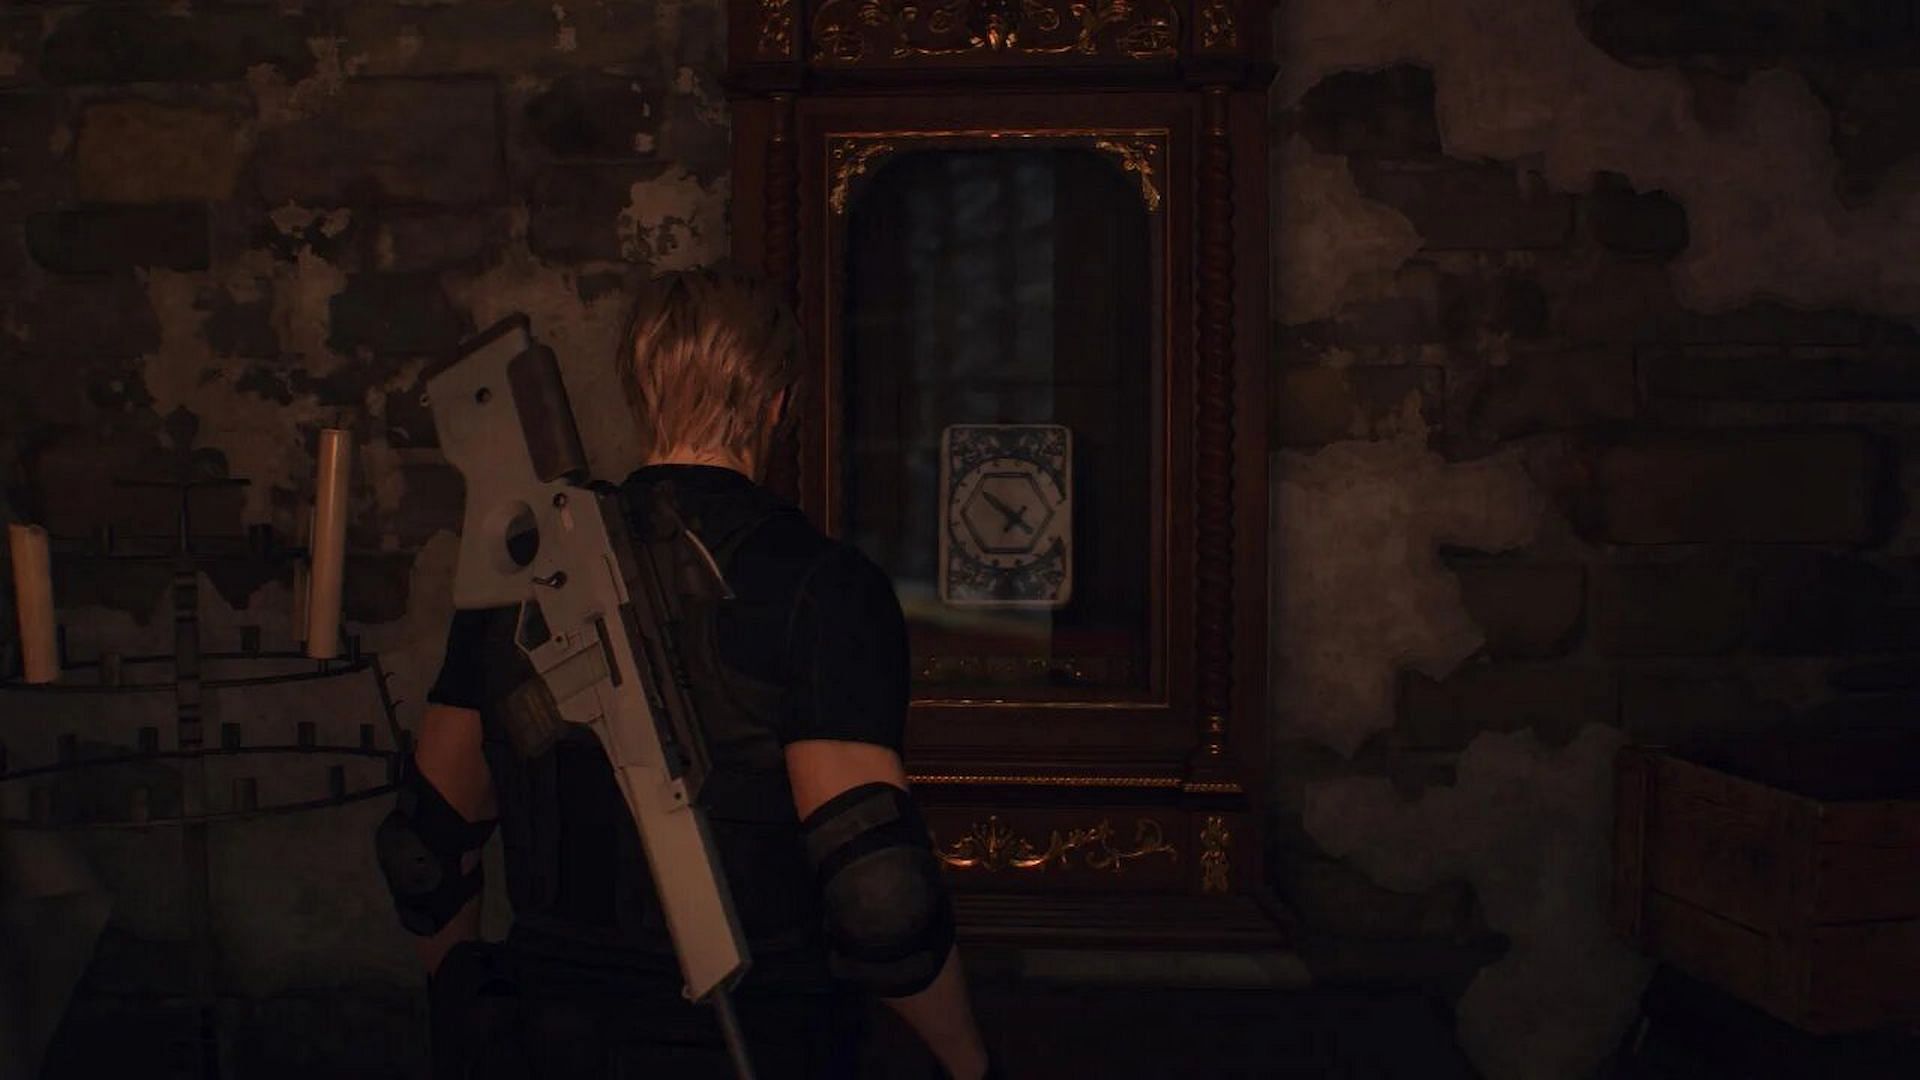 How To Solve the Moon Lantern Puzzle In Resident Evil 4 Remake